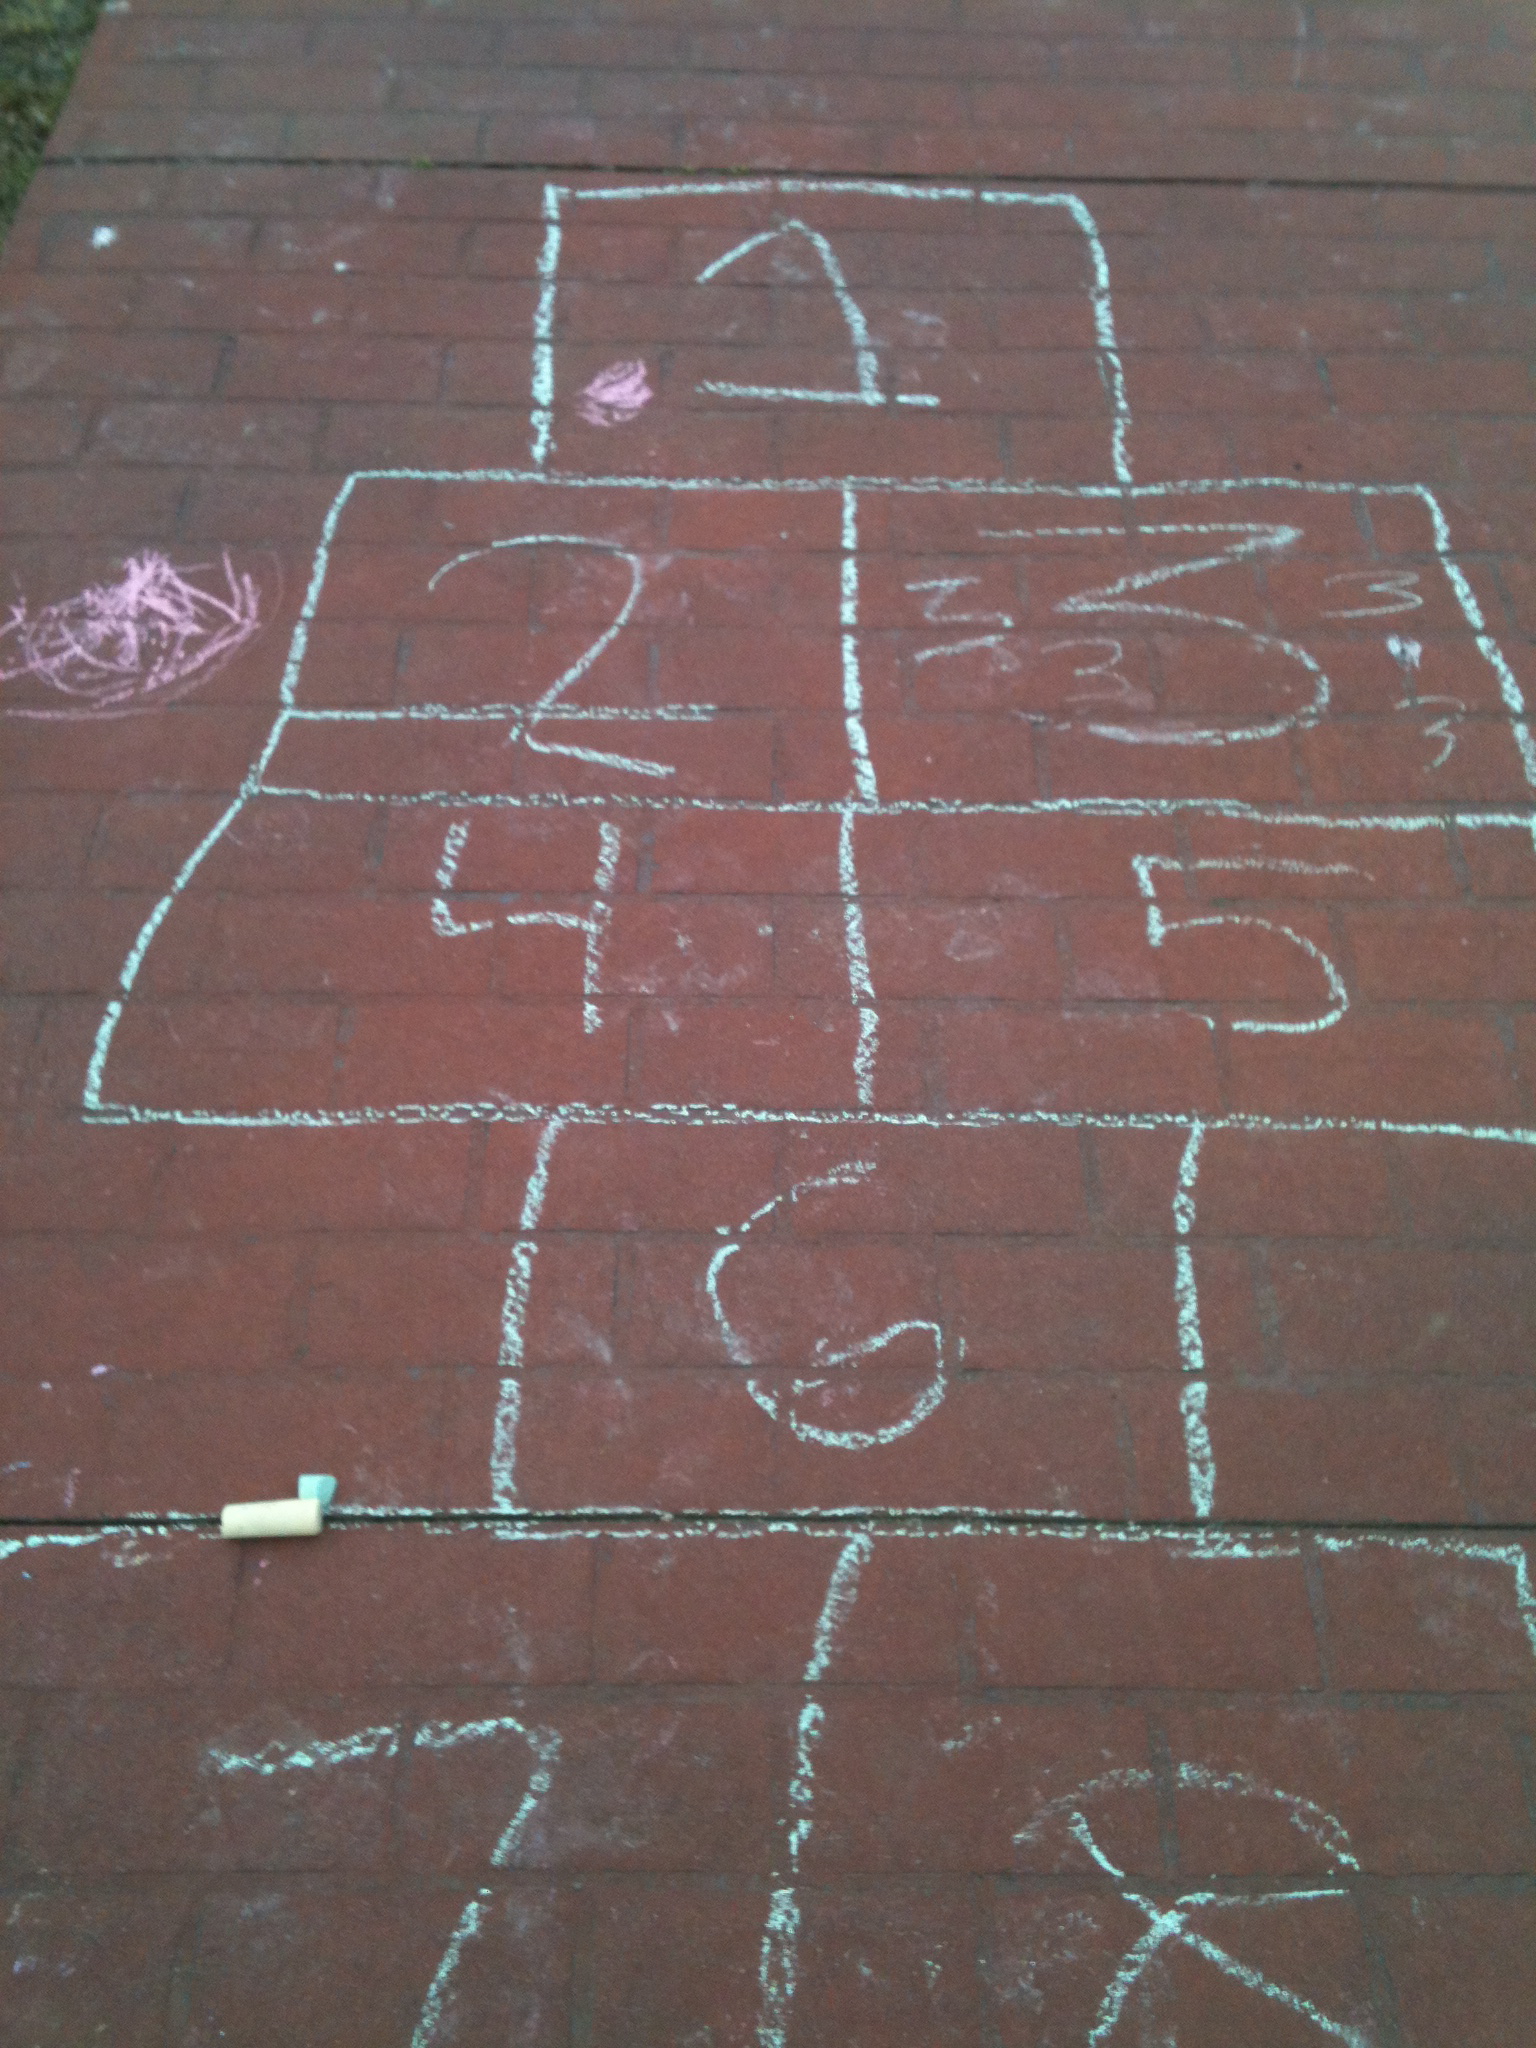 Hopscotch (user submitted)